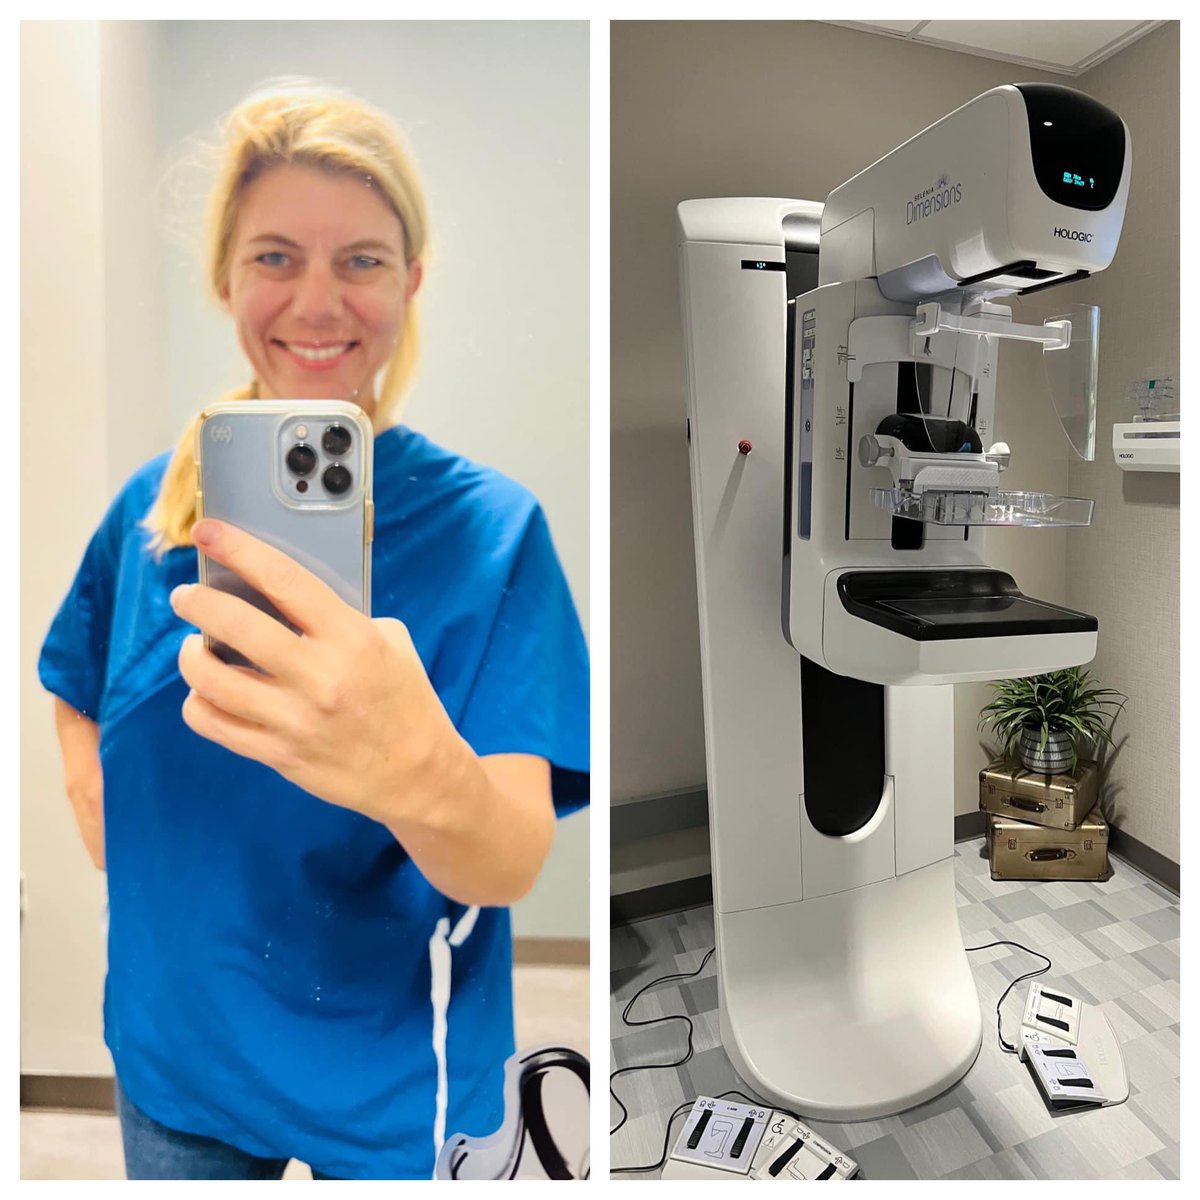 Post-Christmas present to myself. Annual mammogram. Walked in this morning and greeted Maggie, the mammography machine, like an old friend. She can save your life; might as well get personal and name her. Have you had yours lately? -Molly